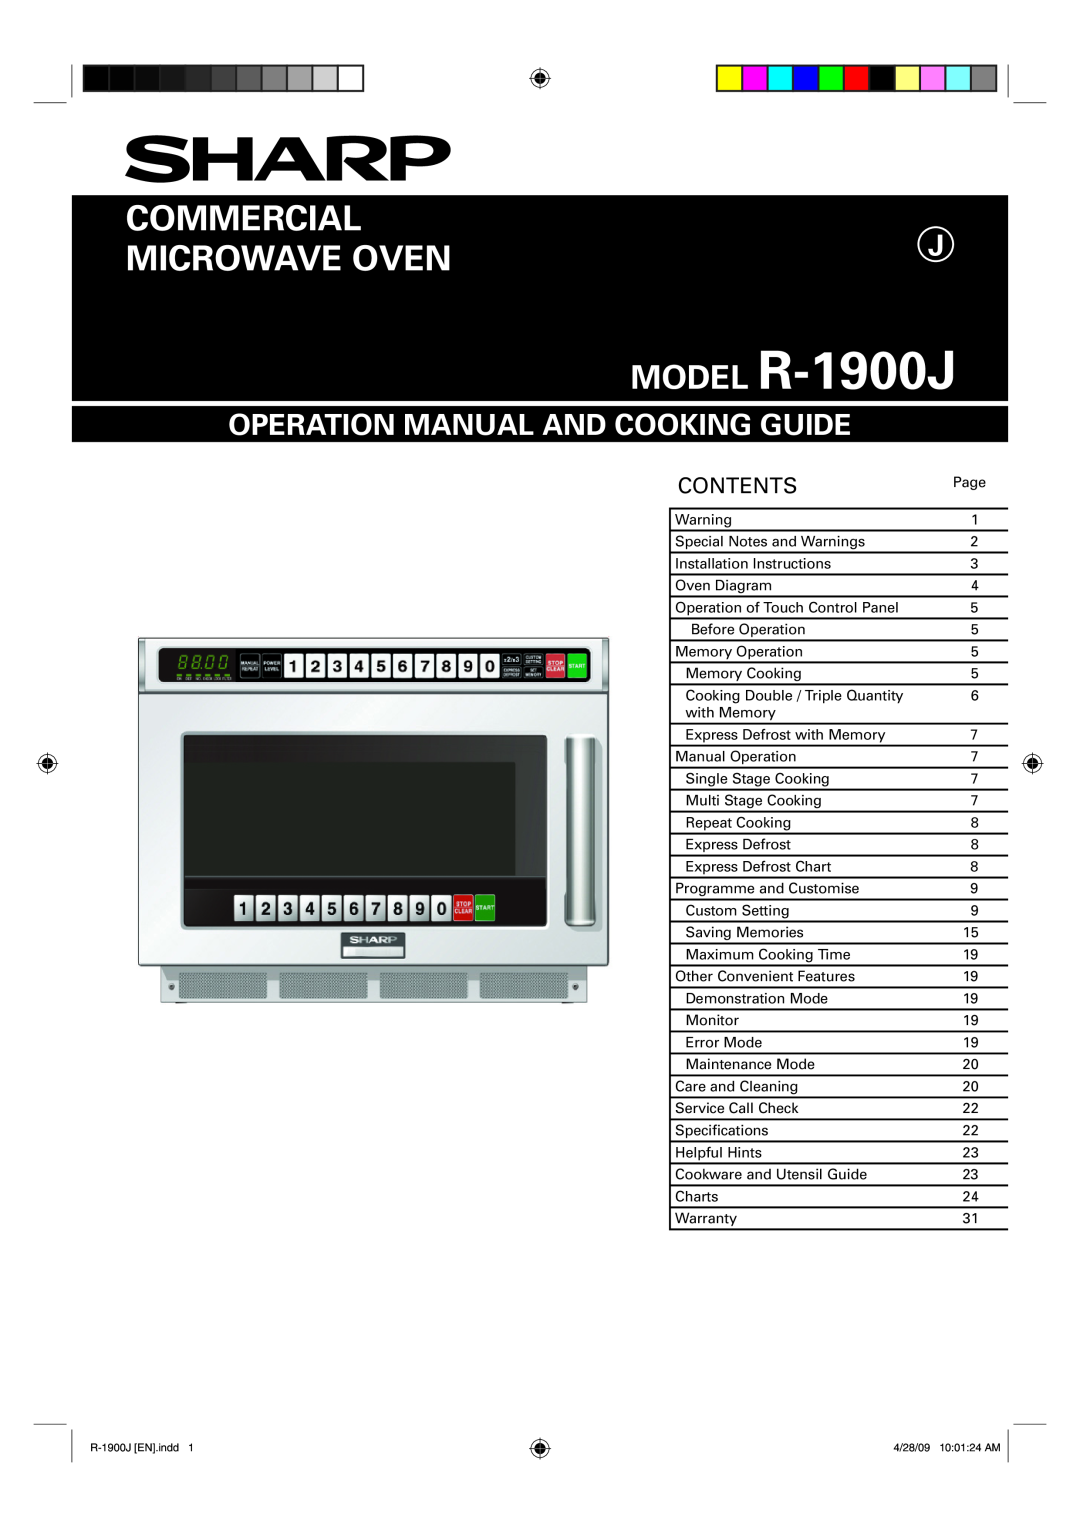 Sharp operation manual MODEL R-1900J, Commercial Microwave Oven, Operation Manual And Cooking Guide, Contents 